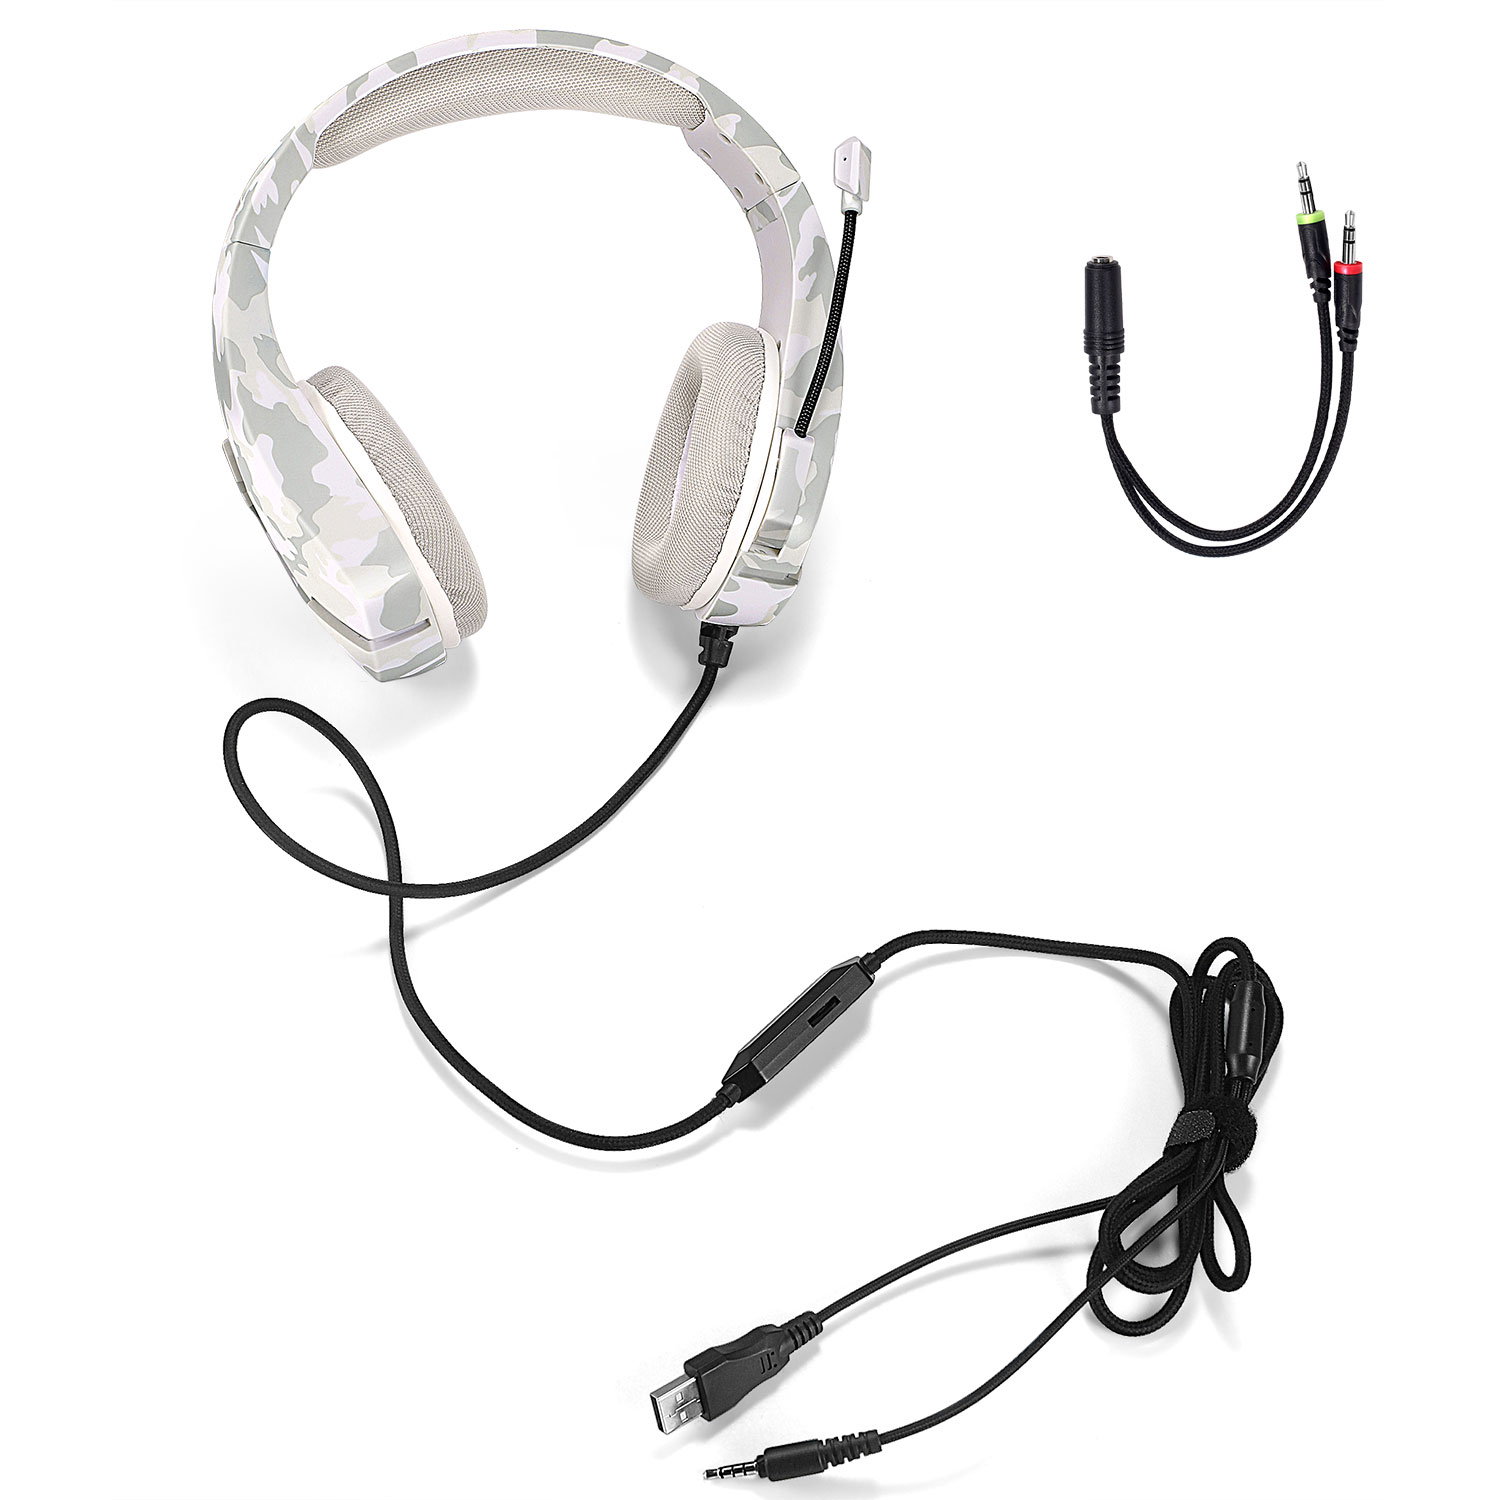 Bakeey-J10-Gaming-Wired-Headphone-Earphones-Over-ear-Headset-Deep-Bass-Stereo-Casque-with-Microphone-1788282-7